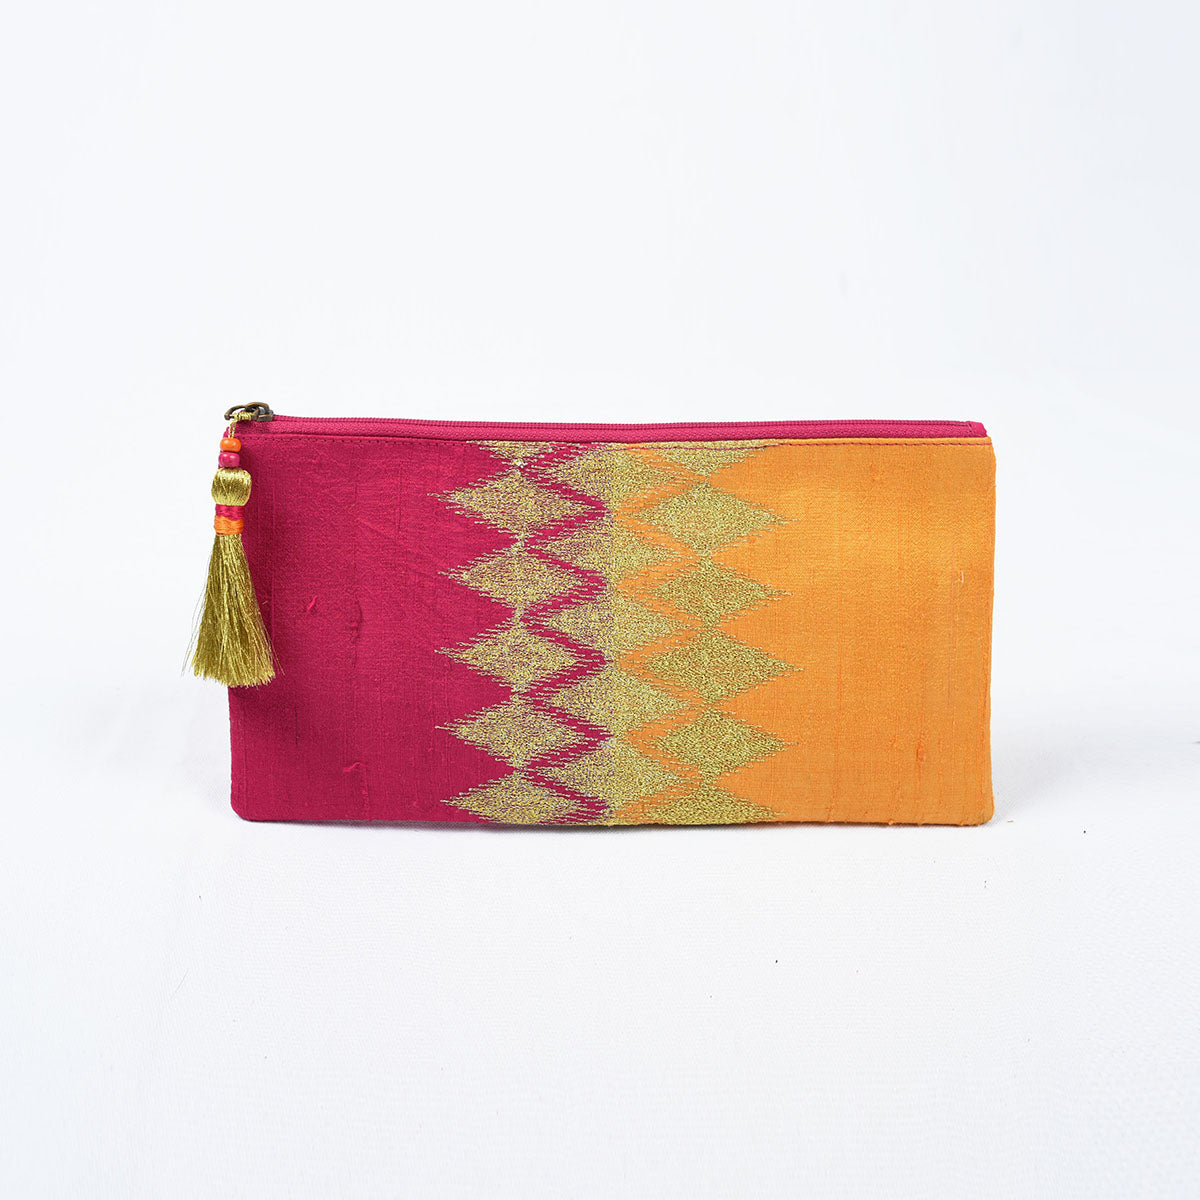 Ikat clutch - hot pink & orange evening purse in pure silk with ikat like embroidery in gold